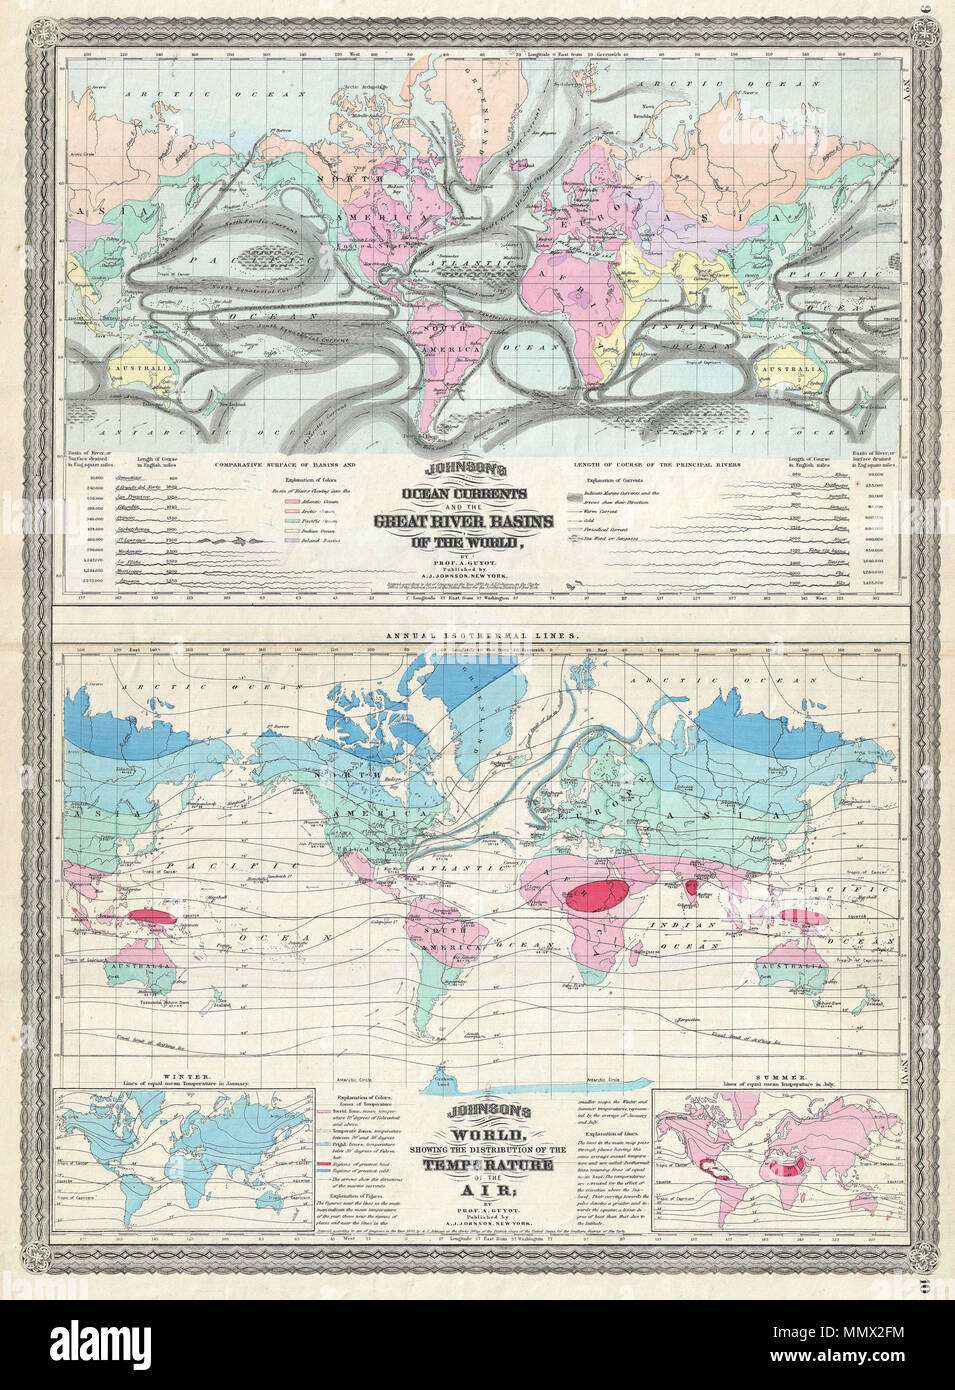 .  English: This is A. J. Johnson 1870 thematic map of the world illustrating Currents, River Basins, and Air Temperature. Combines two maps, both based upon the work of Geologist A. Guyot, on a single folio sheet. The upper map depicts the world’s ocean currents and illustrates the Great River Basins of the world. Under the map a comparative chart indicates the lengths of the world’s great rivers. The lower map depicts the average air temperatures for different parts of the world. Two smaller maps at the bottom of the main map show variances for winter and summer. Features the spirograph styl Stock Photo